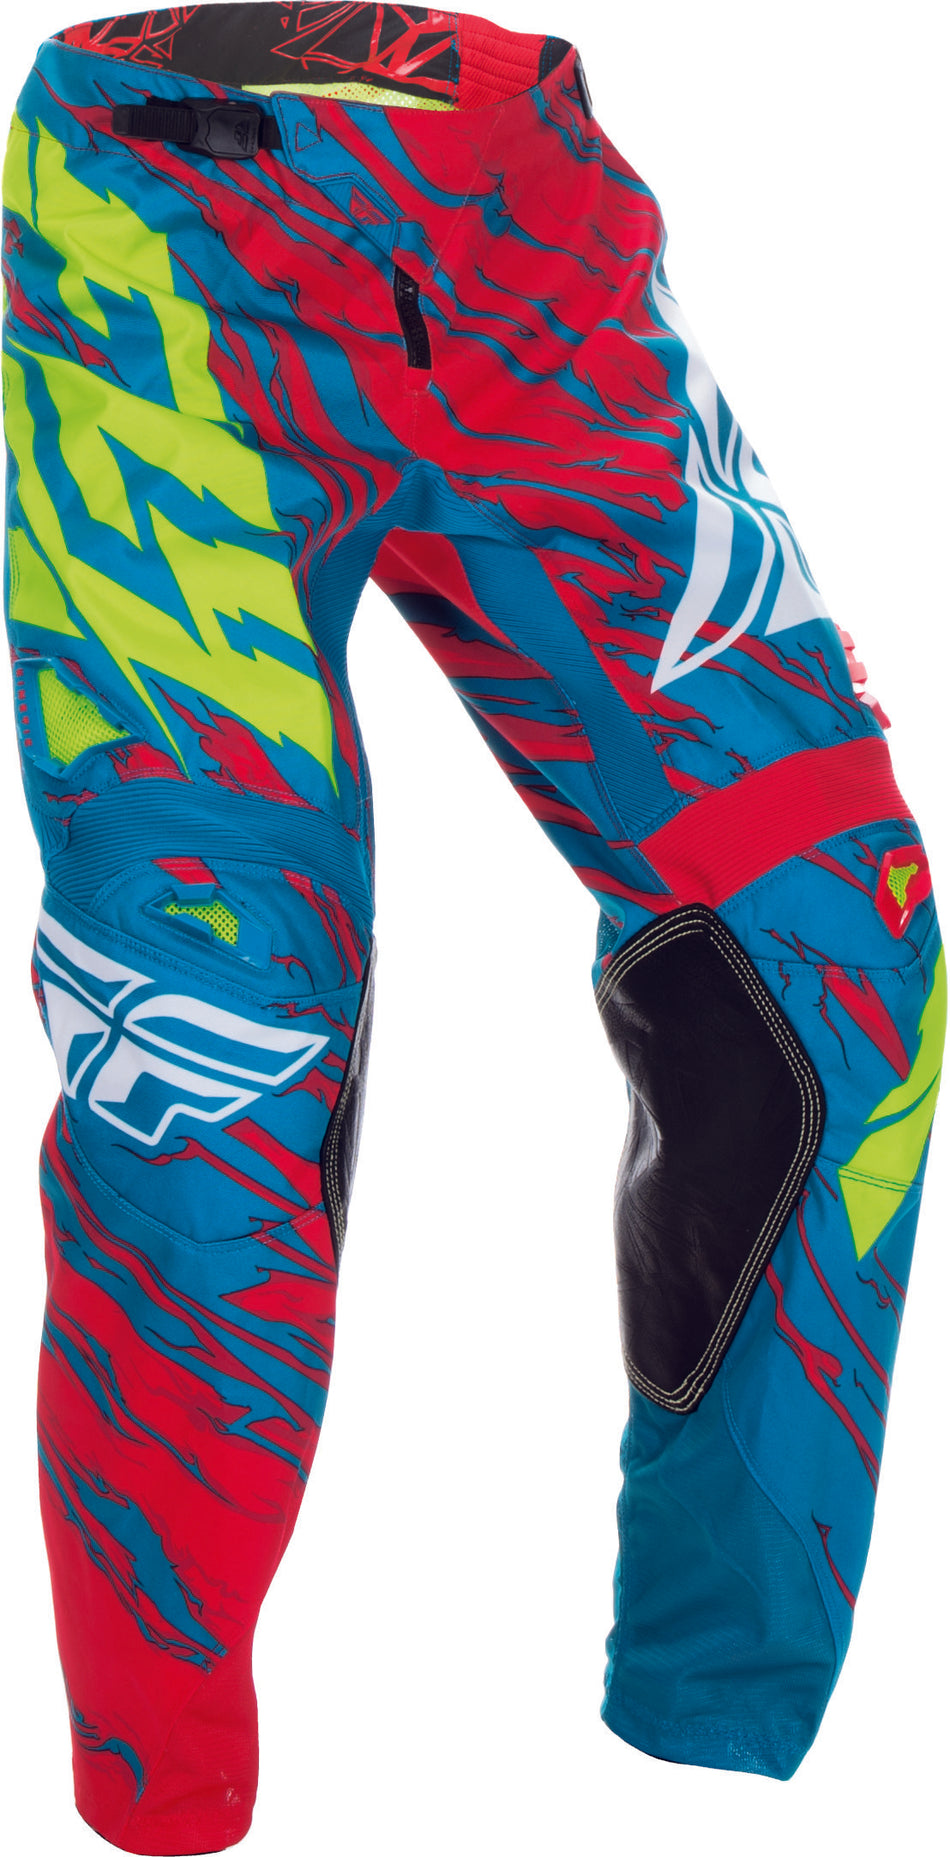 FLY RACING Kinetic Relapse Pant Teal/Red Sz 26 370-43926